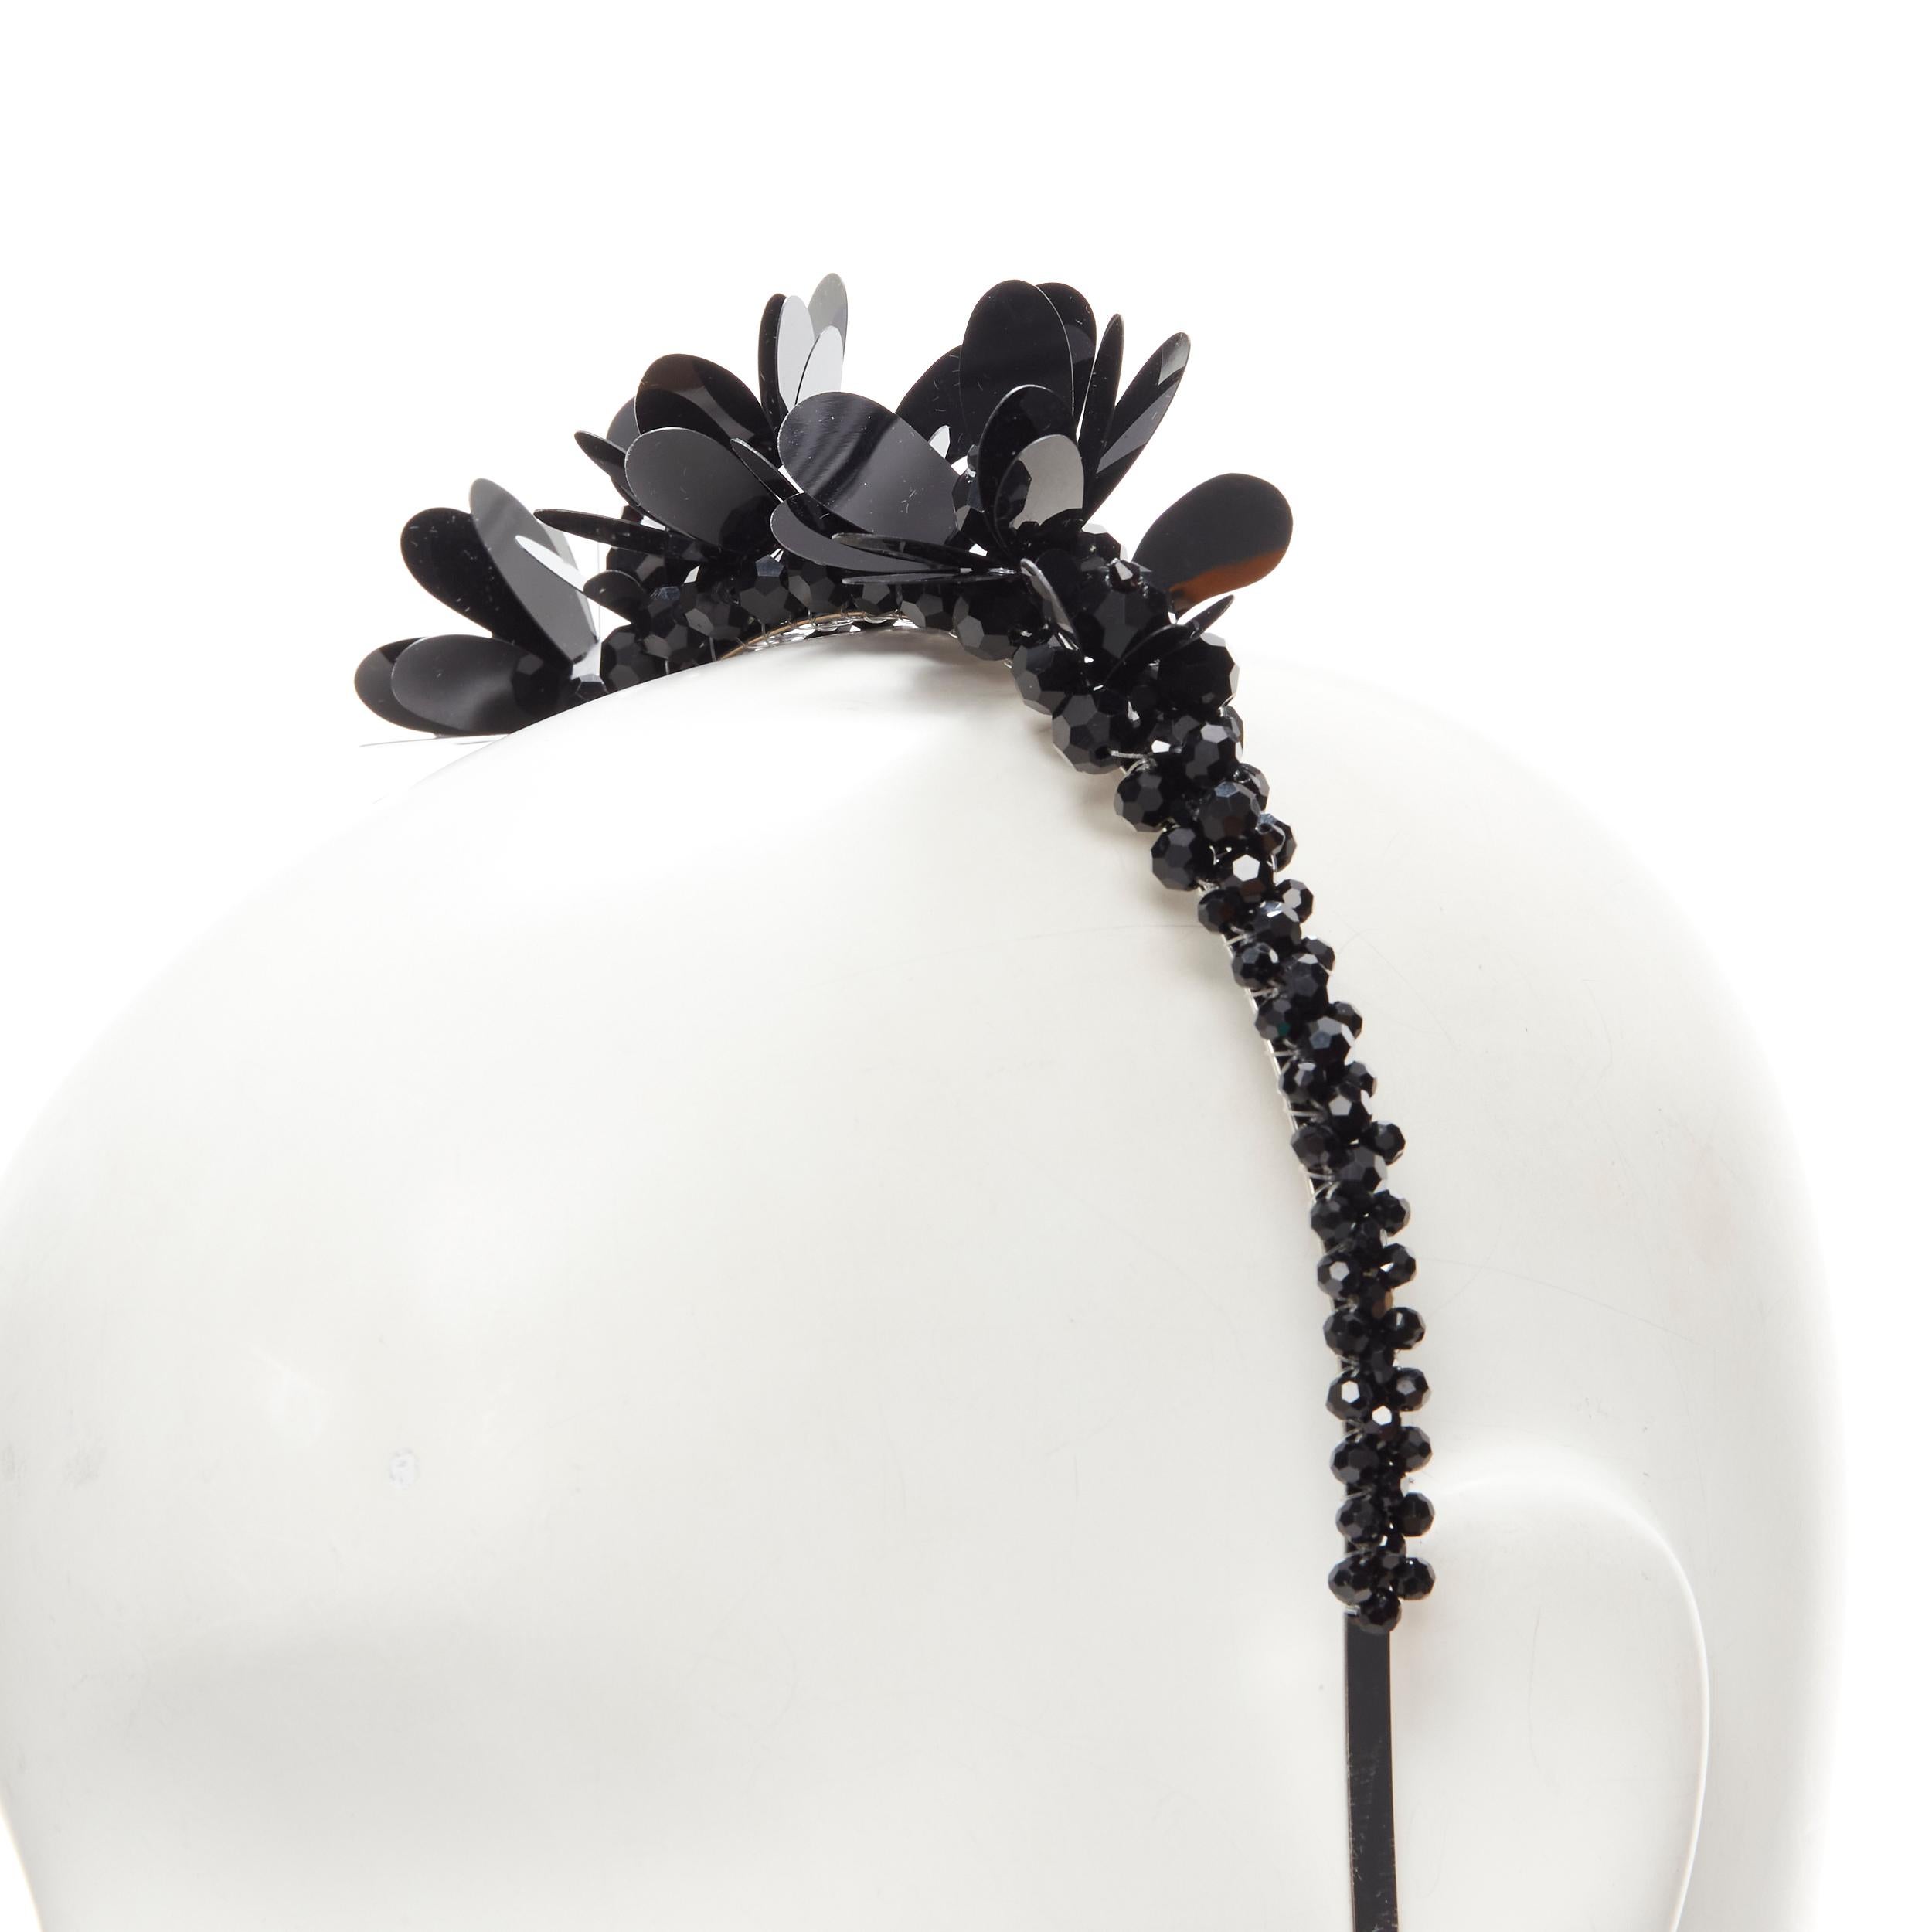 SIMONE ROCHA H&M black beaded floral petal metal headband 
Reference: LNKO/A01998 
Brand: Simone Rocha 
Collection: HM collaboration 
Material: Metal 
Color: Black 
Pattern: Solid 

CONDITION: 
Condition: Excellent, this item was pre-owned and is in